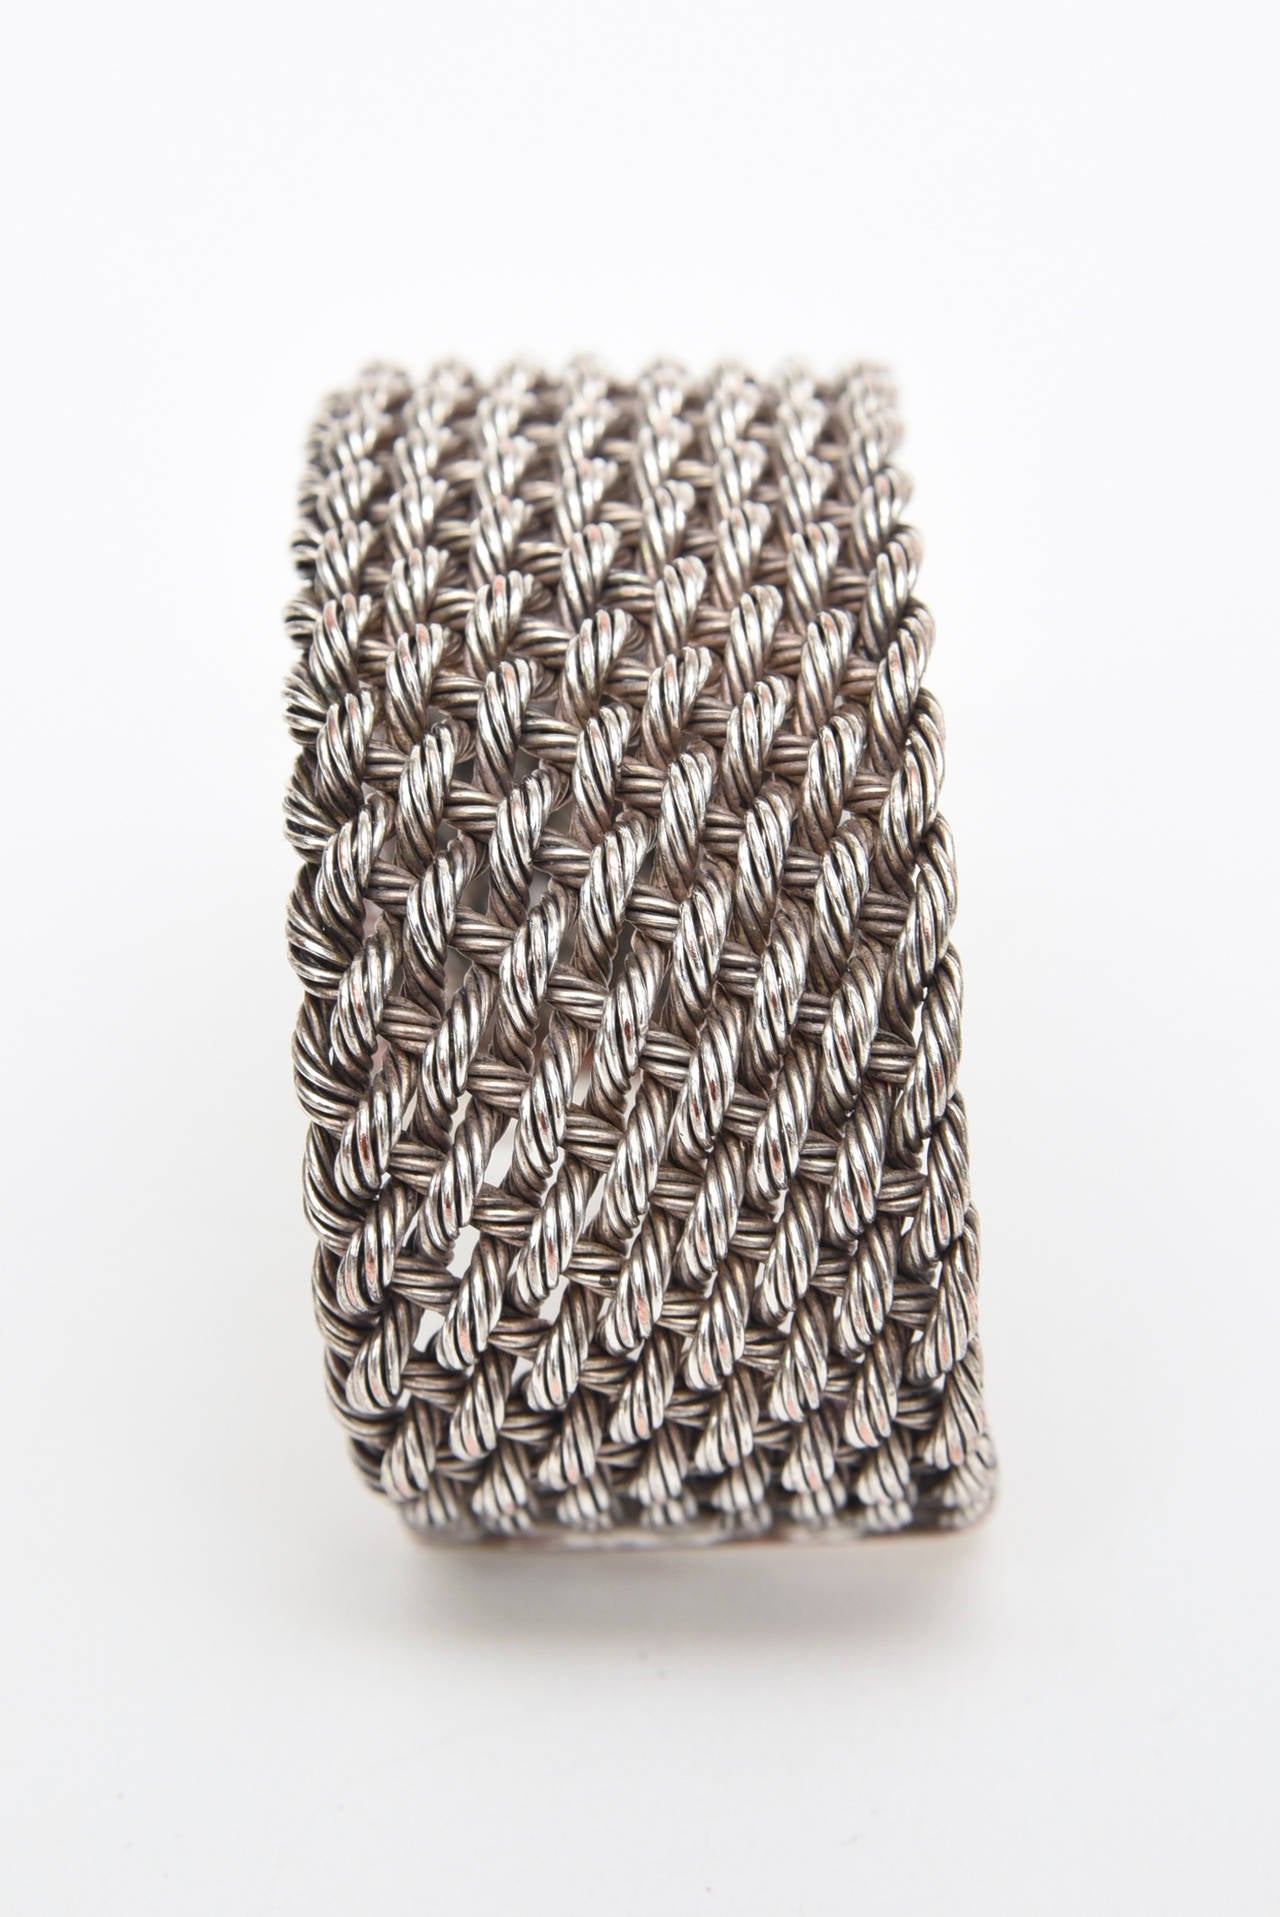 This lovely sterling silver cuff bracelet has nice braided woven sterling silver that has the original patina. The detailing is wonderful and presents on the wrist a great design. It will fit a medium to larger wrist. That size would be a size 7,